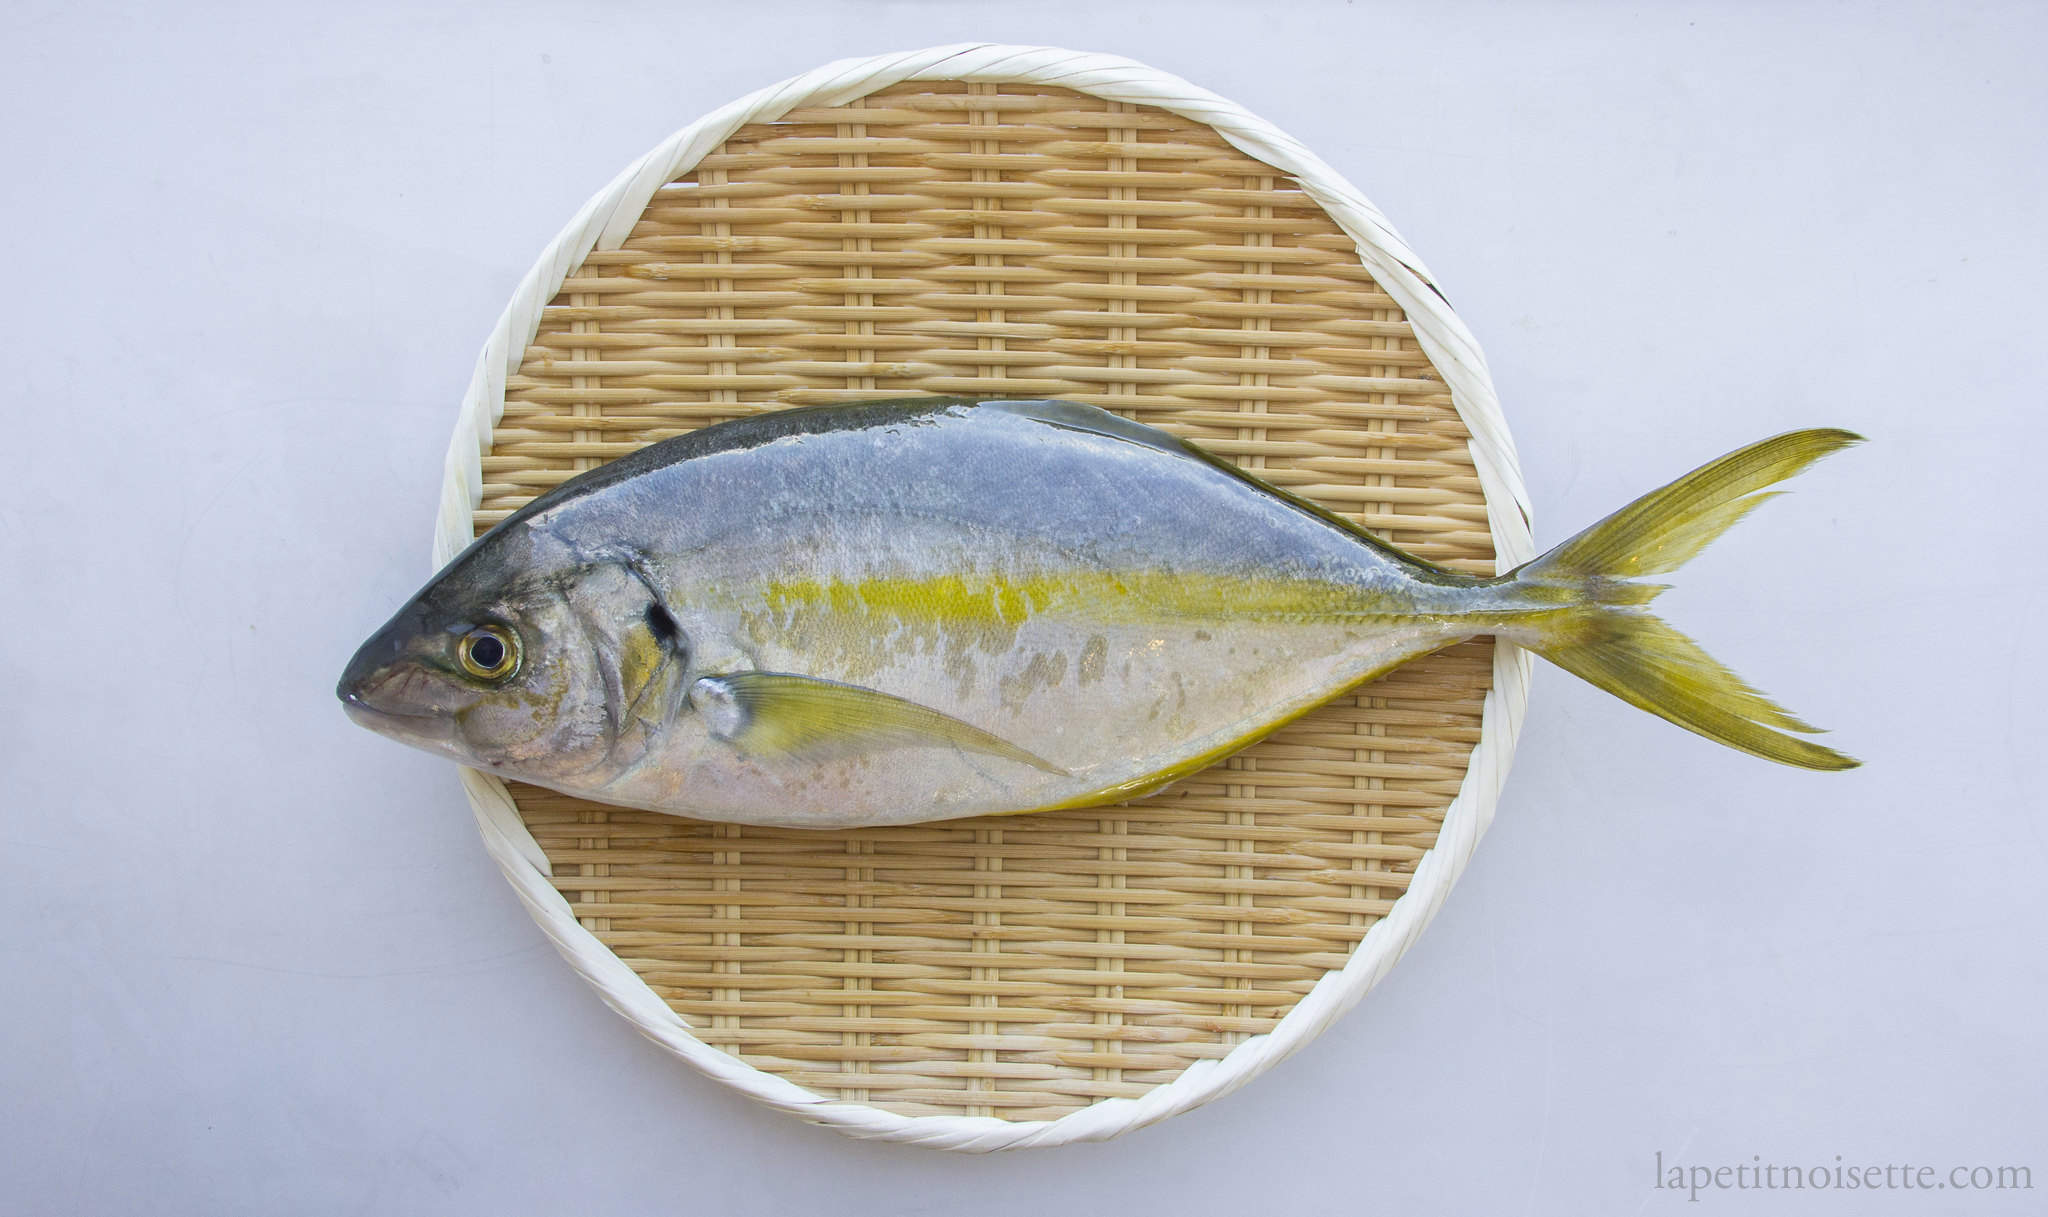 A Japanese Trevally on a bamboo colander.